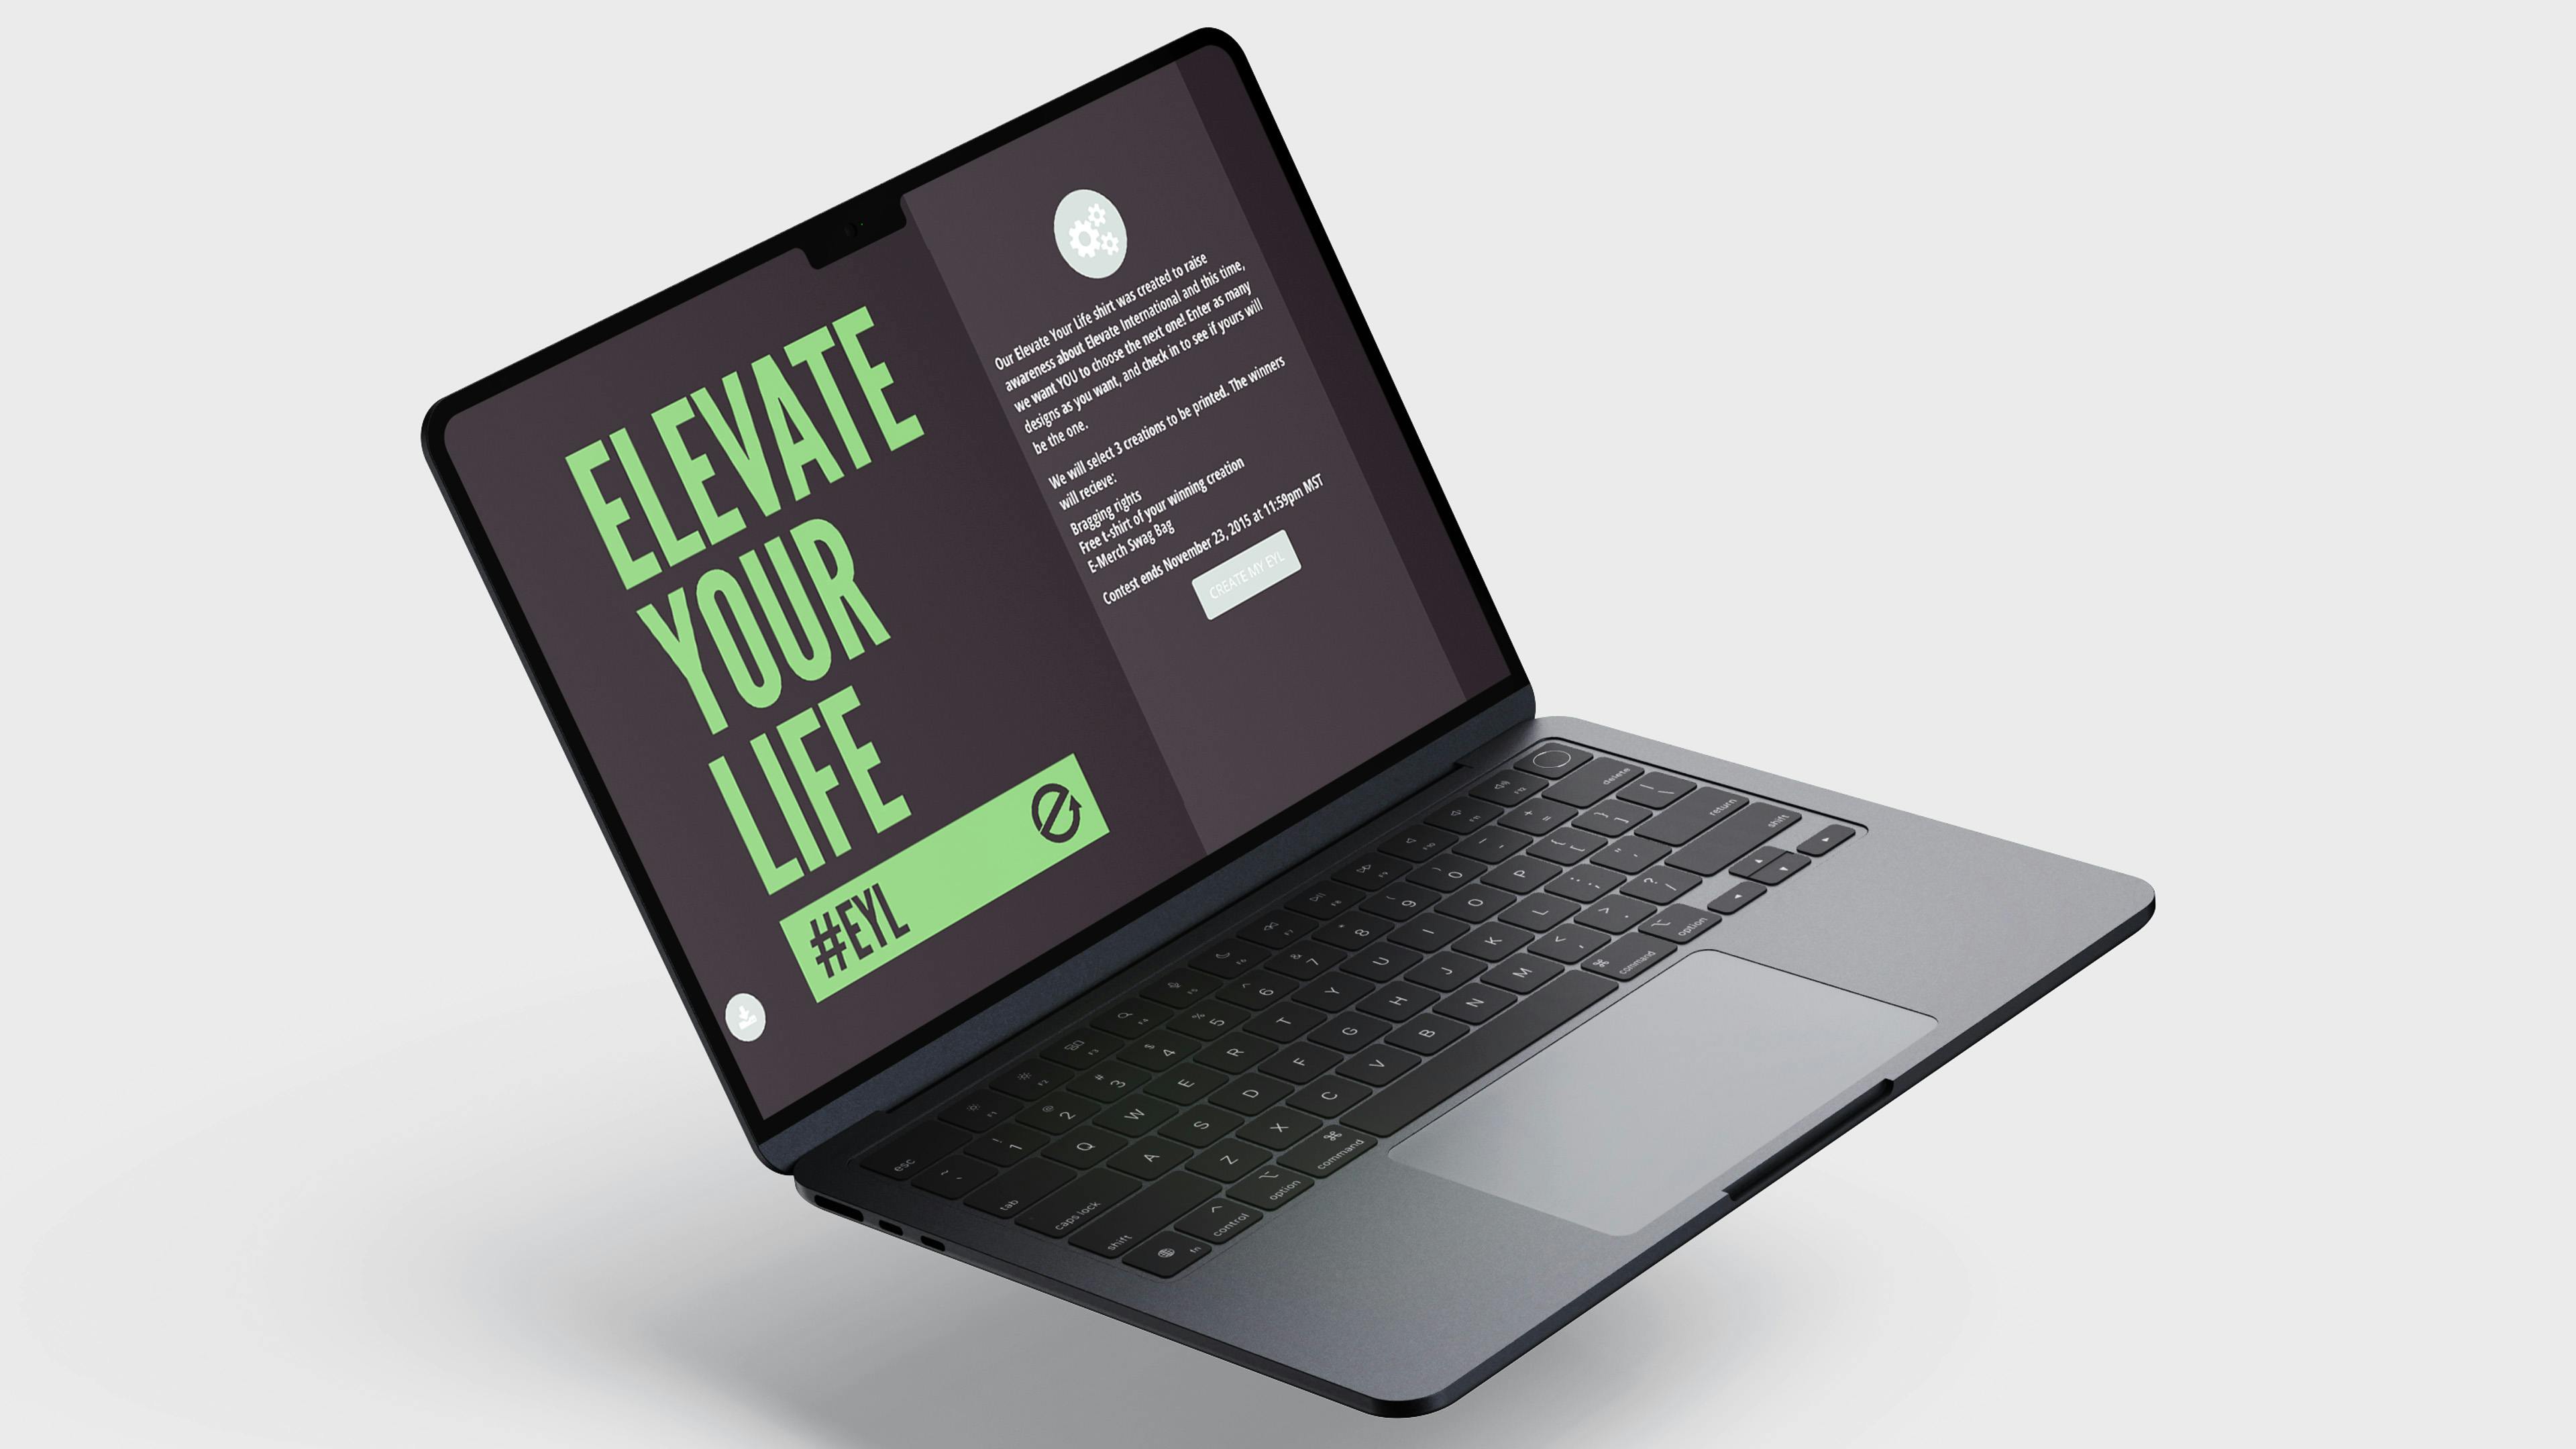 A mockup of a Macbook with the homepage of MyEYL